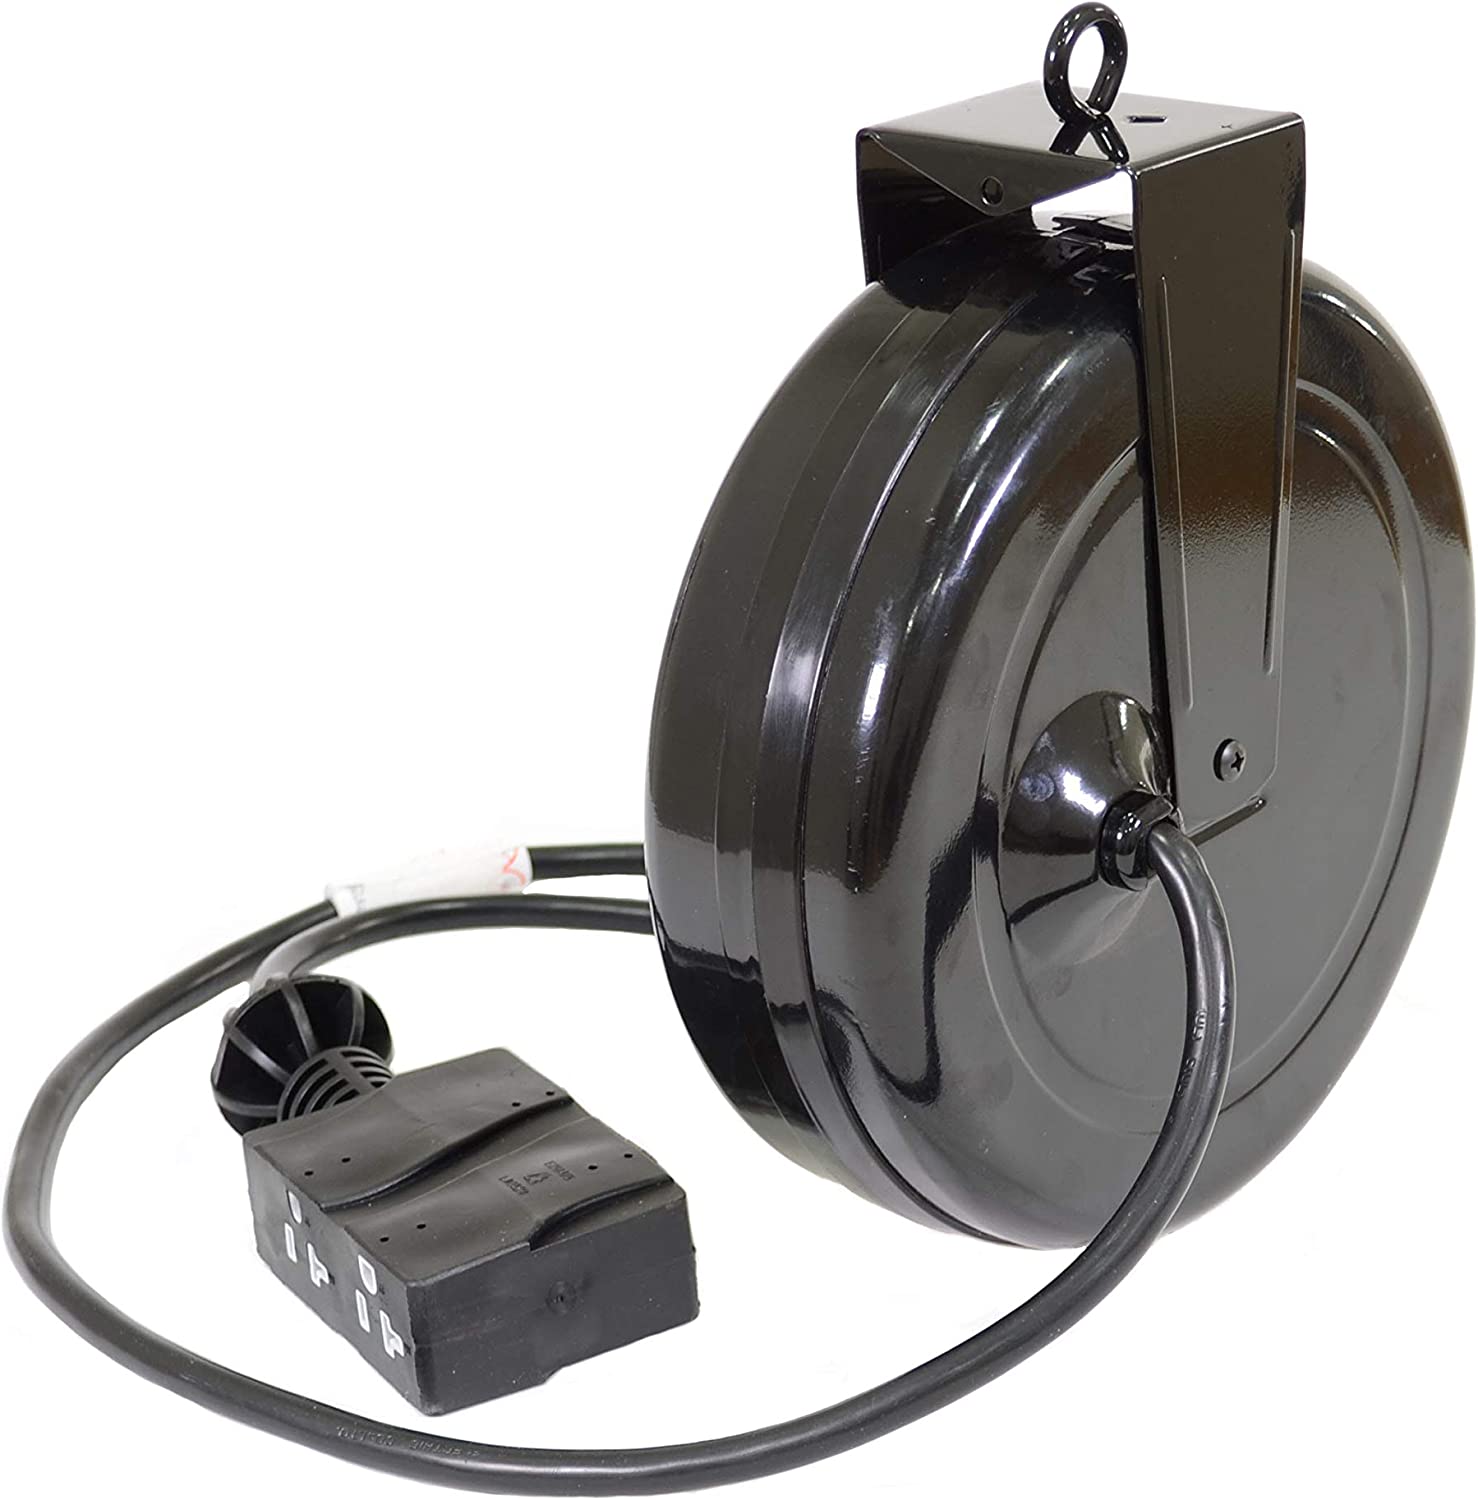 Alert 5020TF-4C Retractable Cord Reel 4 Outlets